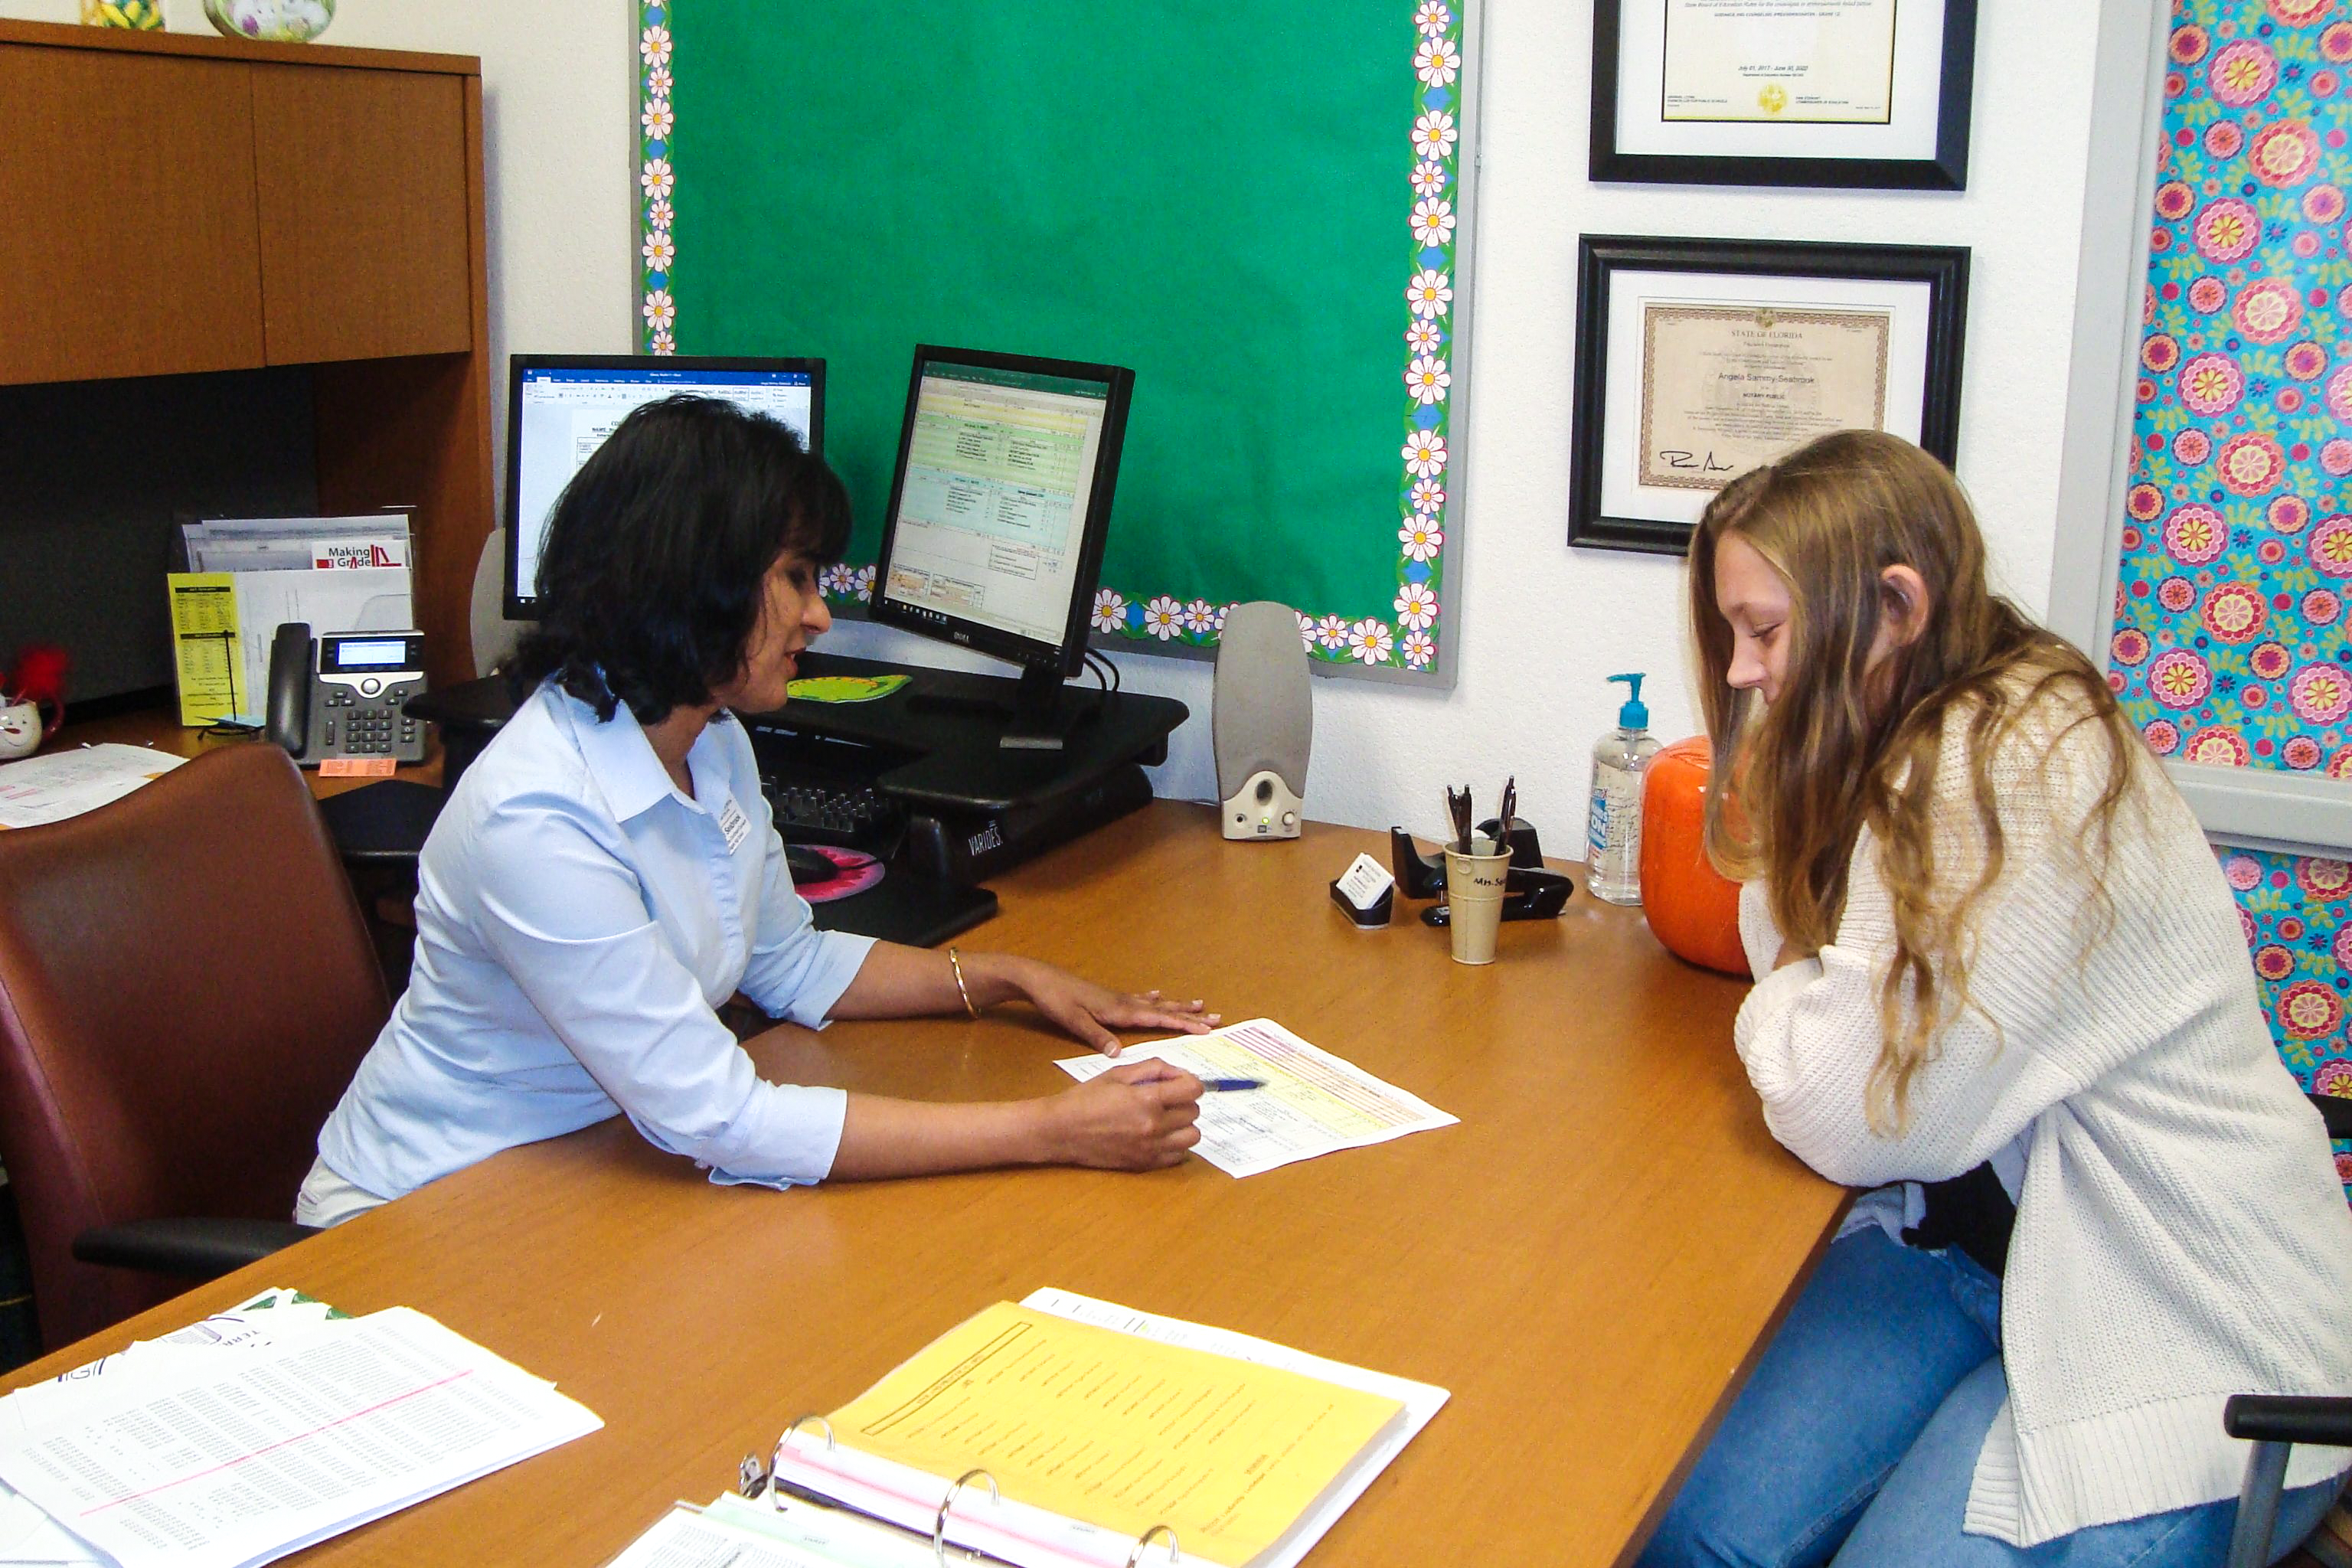 Counselor and Student chatting at an office